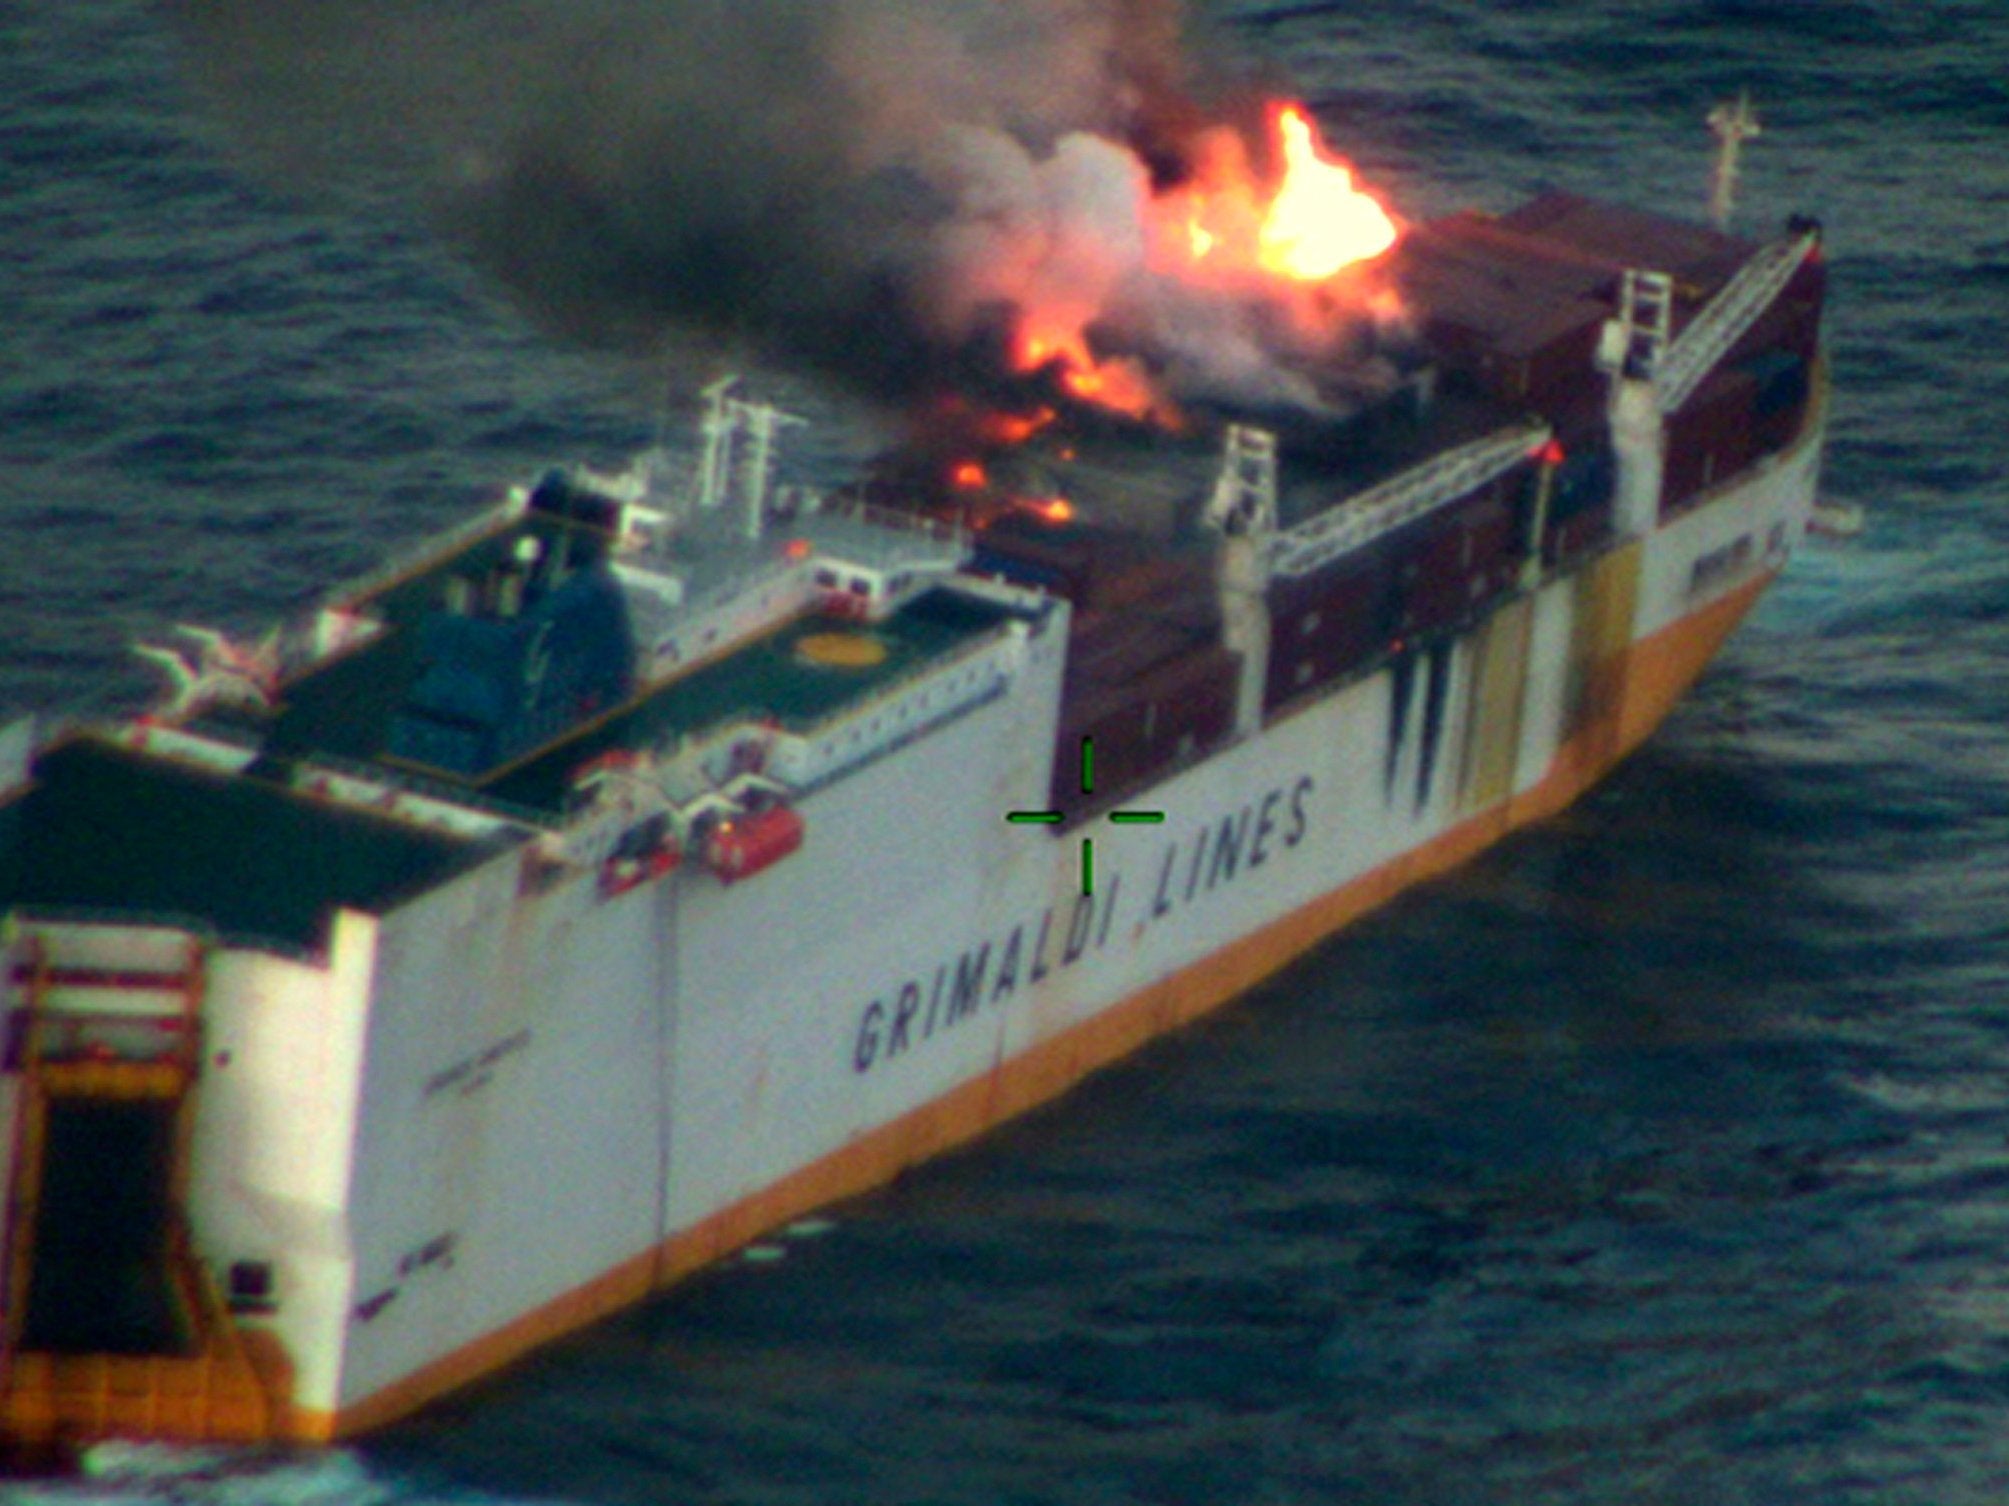 Grimaldi vessel Grande America on fire in the Bay of Biscay, off the west coast of France